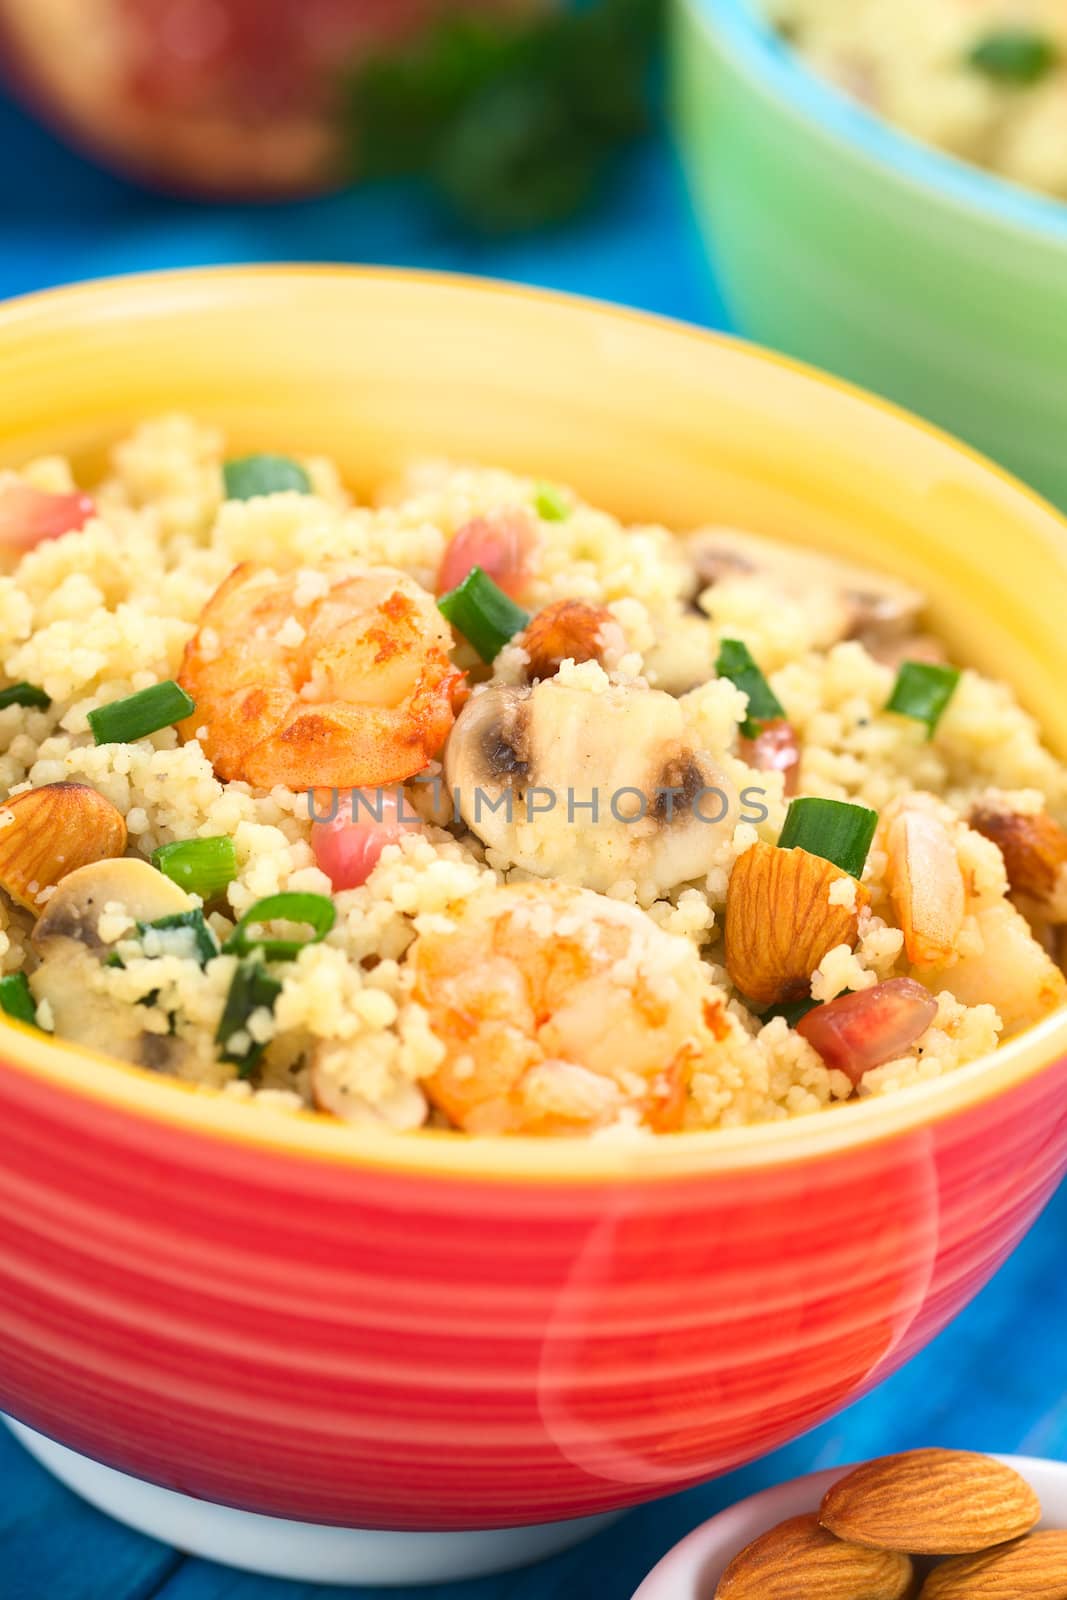 Couscous with Shrimp, Mushroom, Almond and Pomegranate by ildi